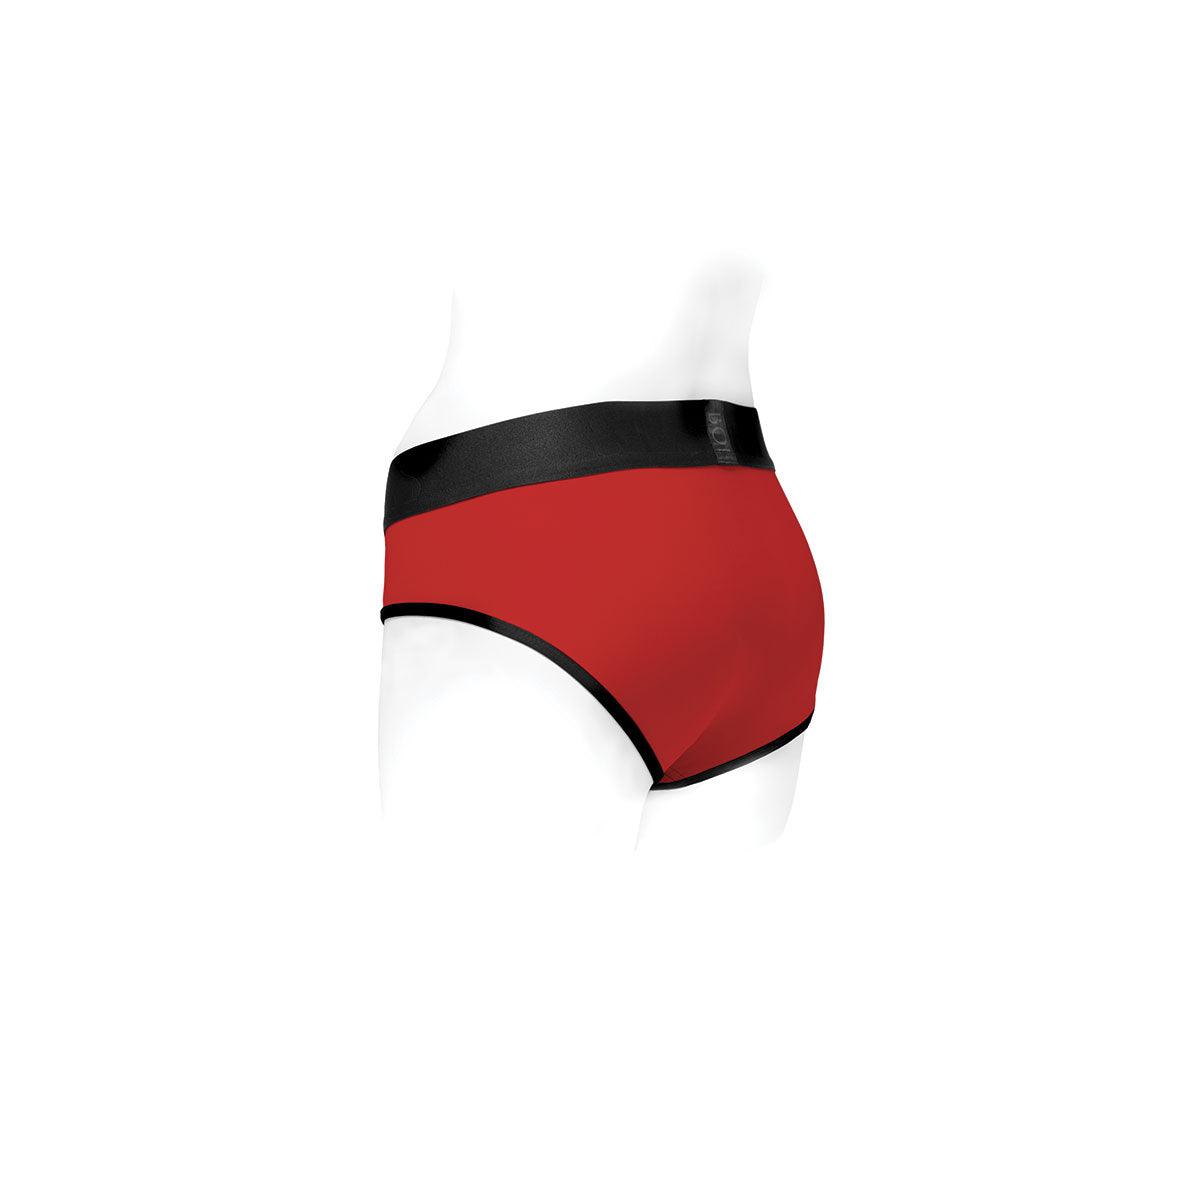 SpareParts Tomboi Harness Red - Nylon - shop enby